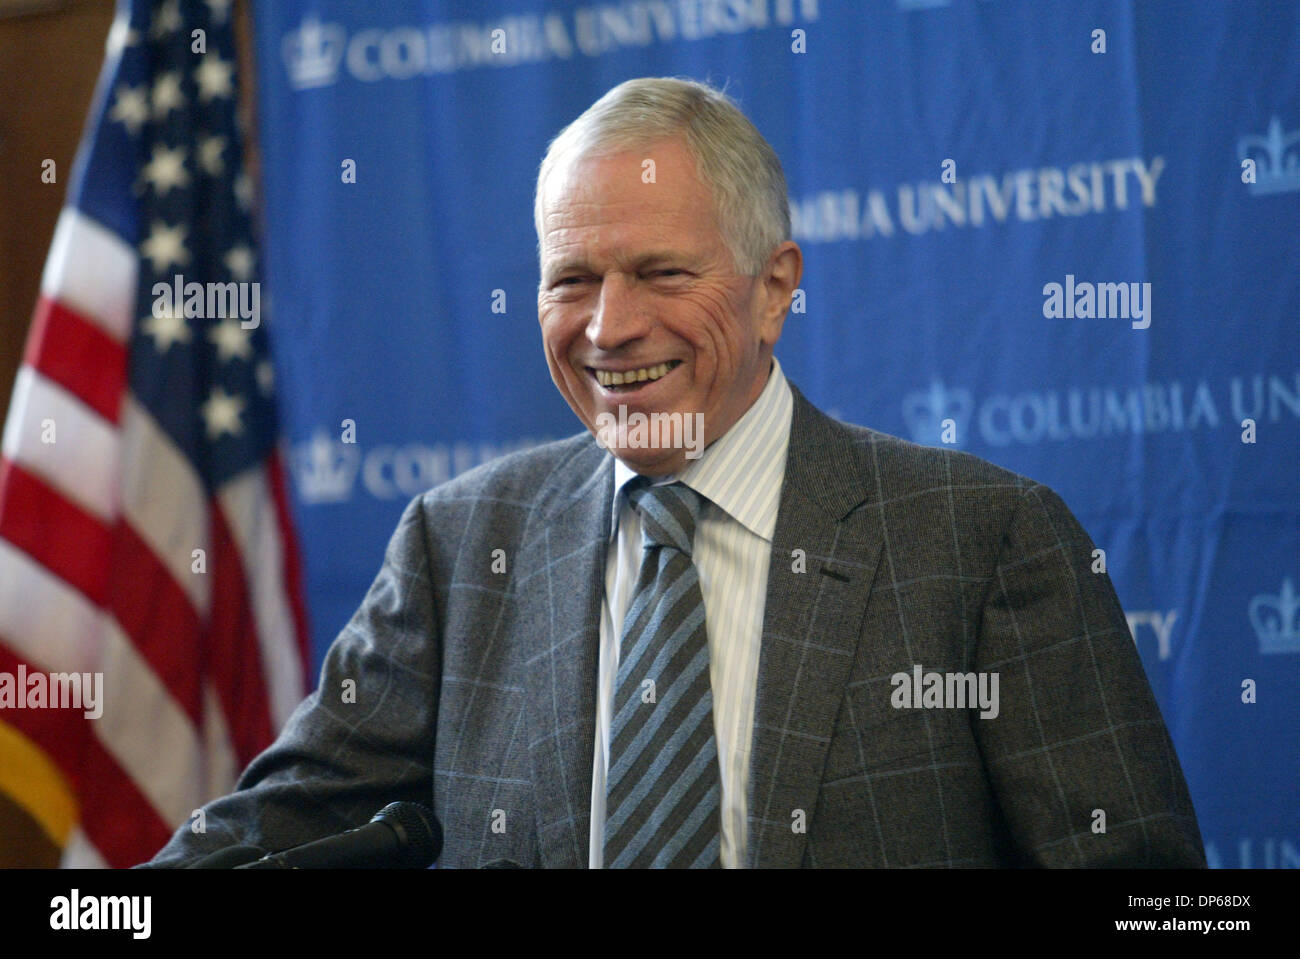 Oct 09, 2006; Manhattan, NY, USA; Professor EDMUND S. PHELPS Nobel Economics Prize winner during the press conference at Columbia University in Manhattan. Mr. Phelps, Mc Vickar Professor of Political Economy at the Columbia and Director on Capitalism and Society at the Earth Institute, was awarded the Nobel Prize in Economics by the Royal Swedish Academy of Sciences. Mandatory Cred Stock Photo